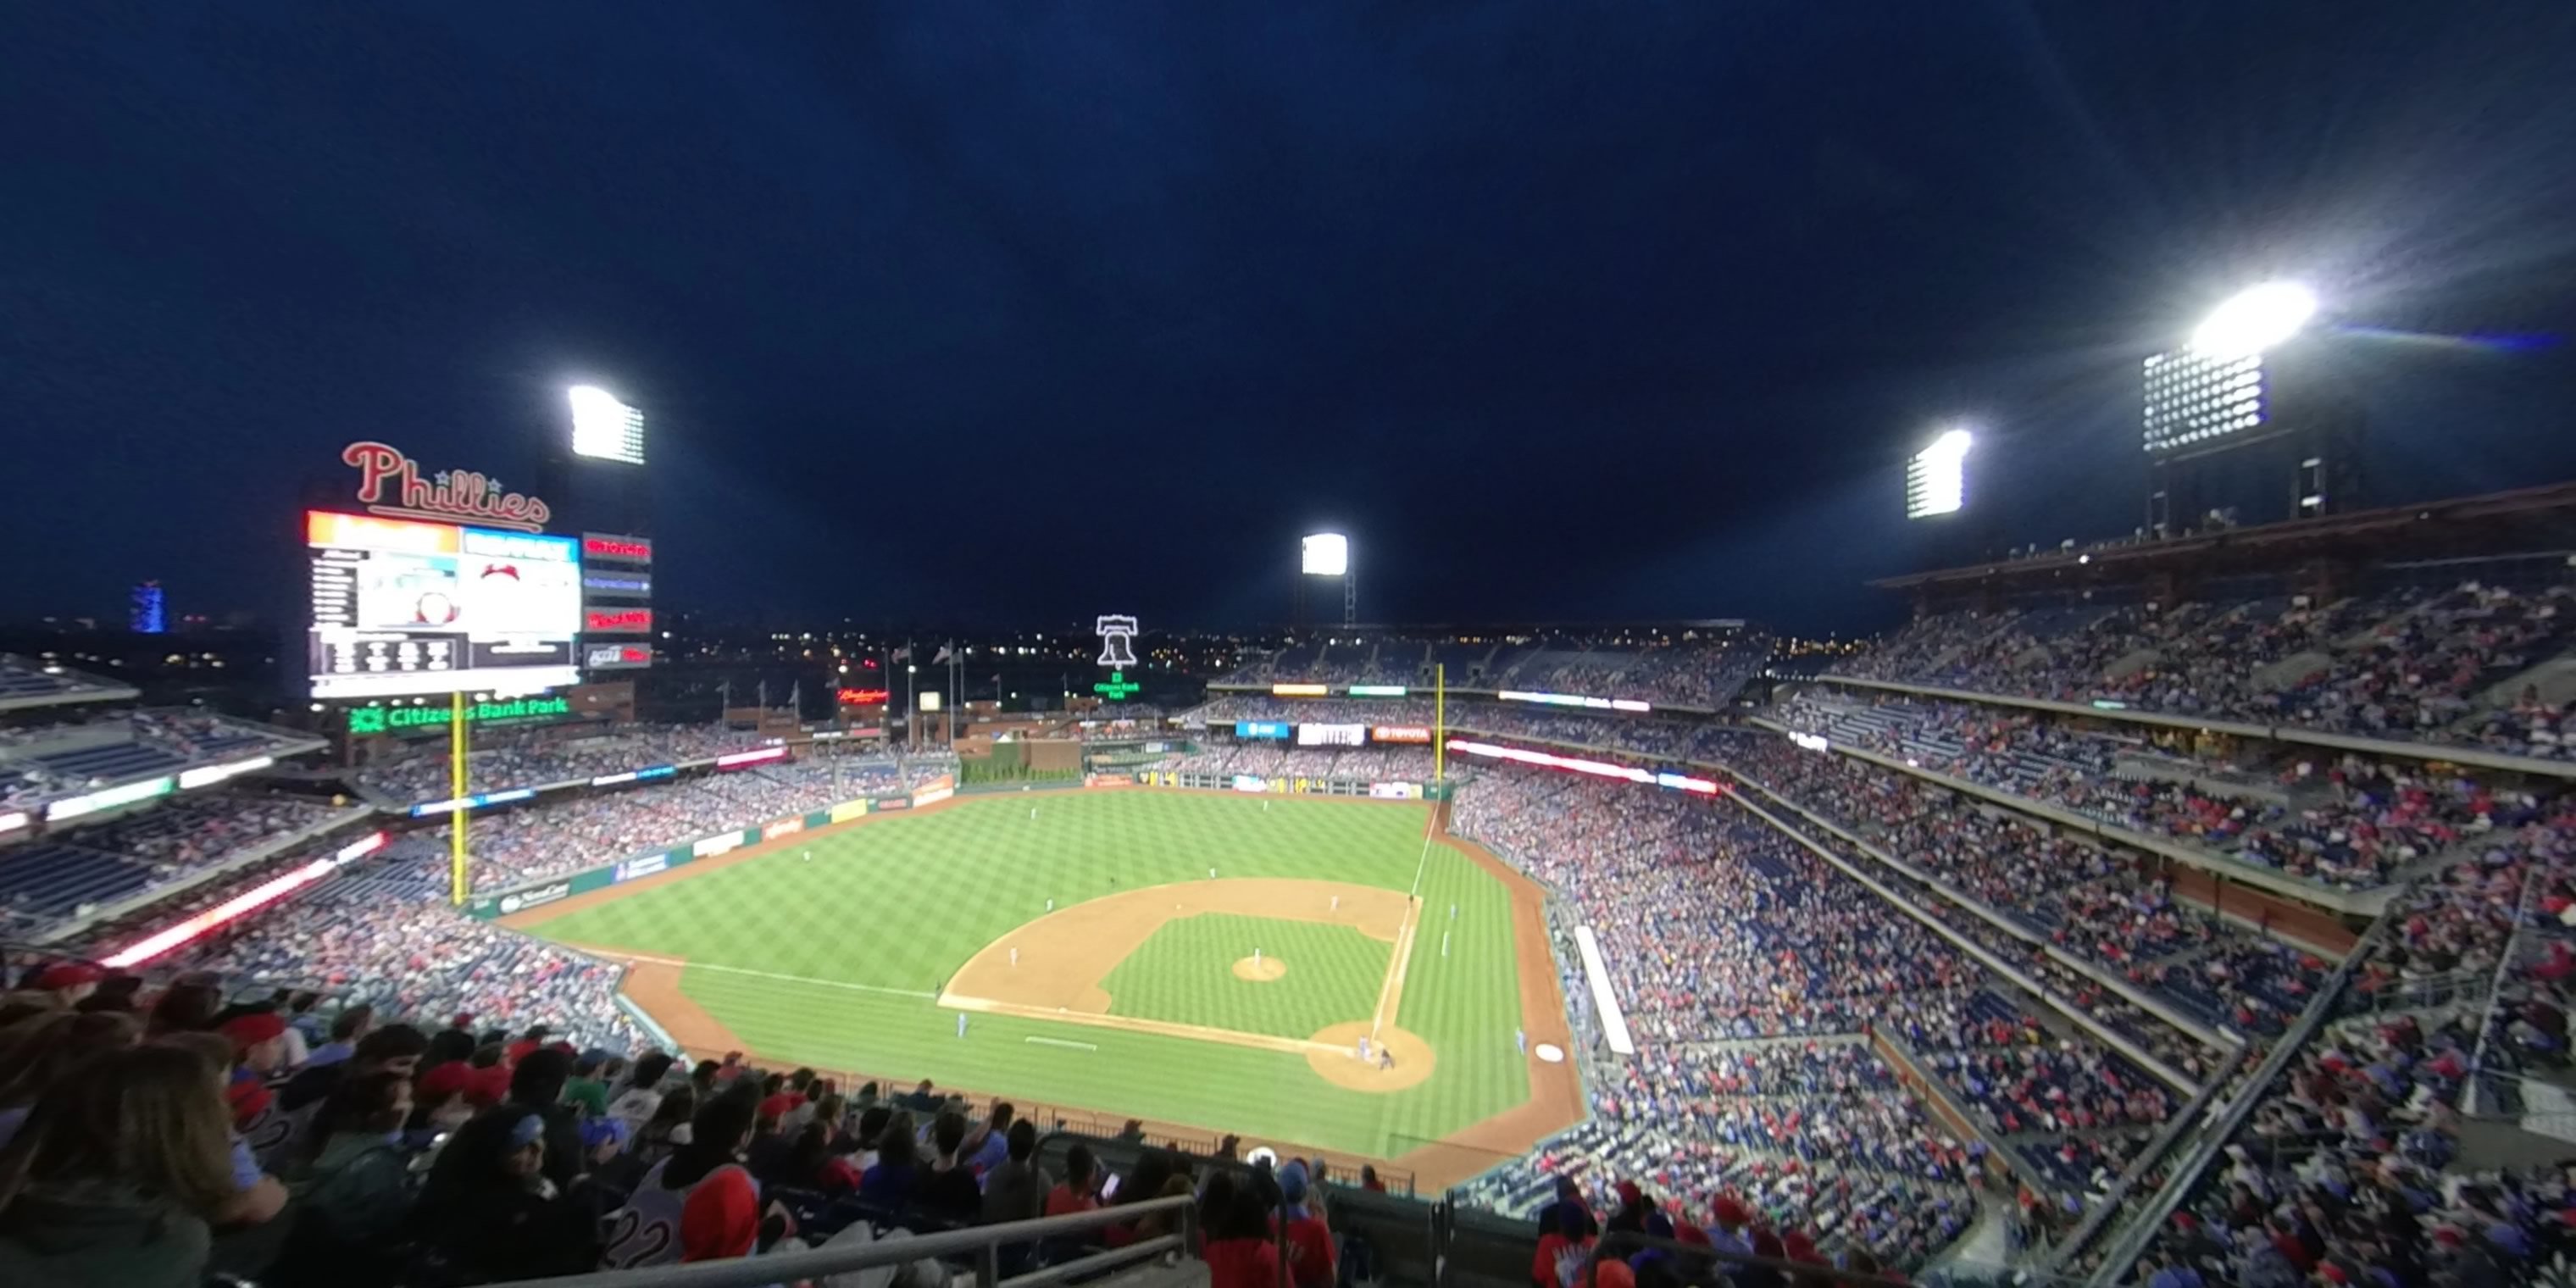 section 423 panoramic seat view  for baseball - citizens bank park